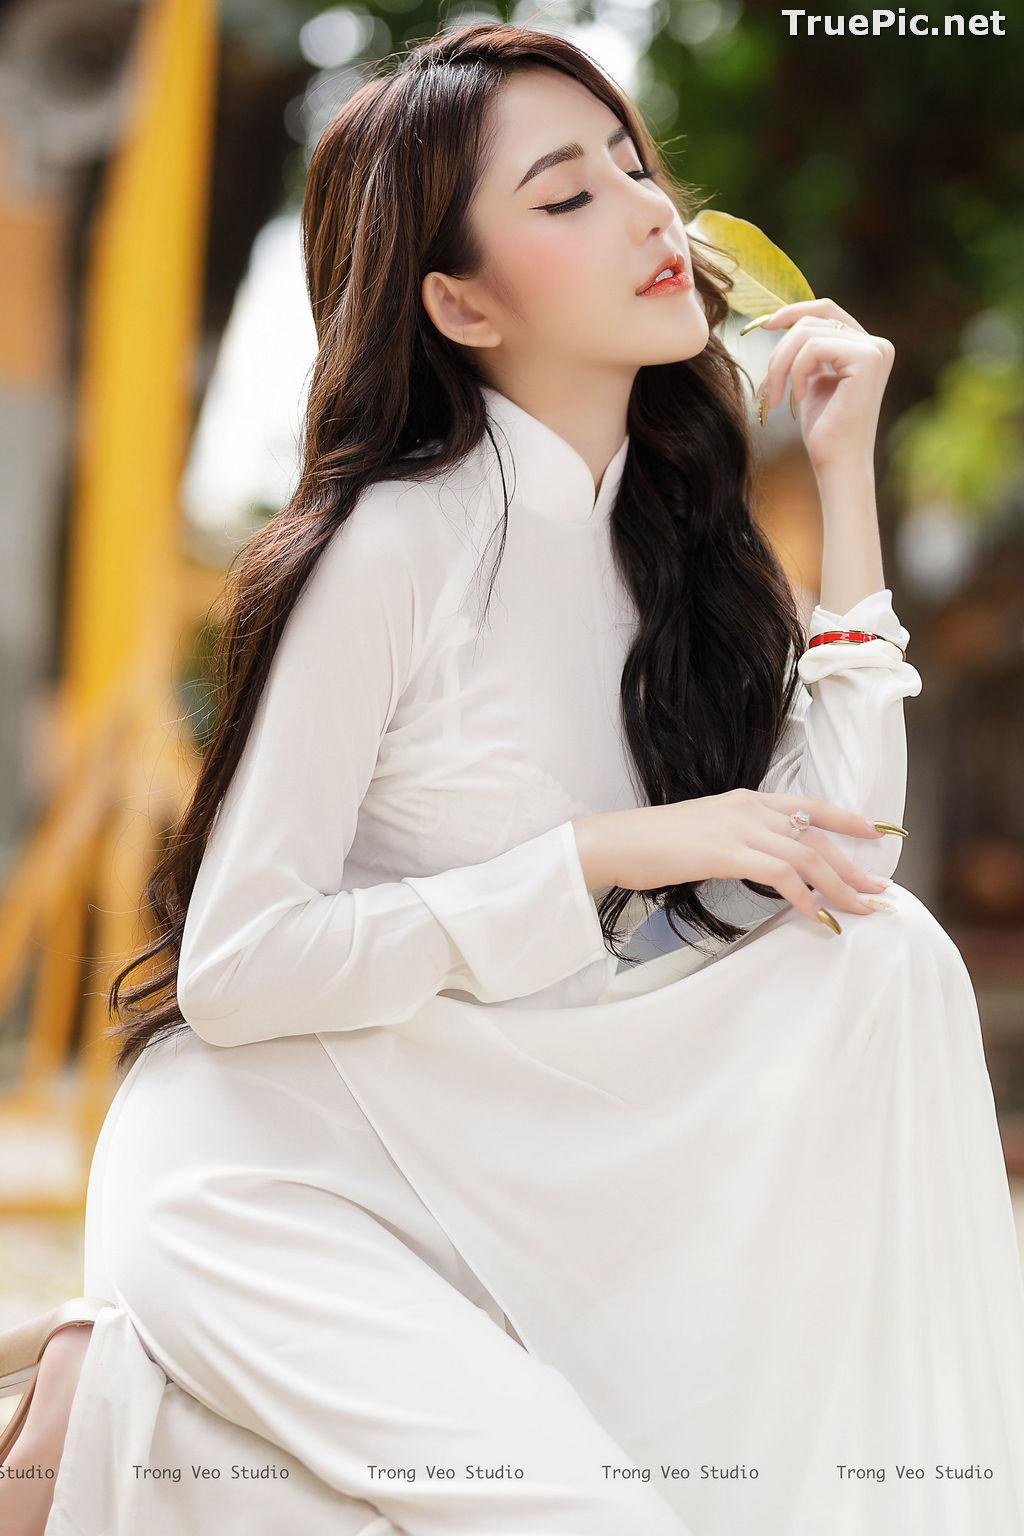 Image The Beauty of Vietnamese Girls with Traditional Dress (Ao Dai) #3 - TruePic.net - Picture-26